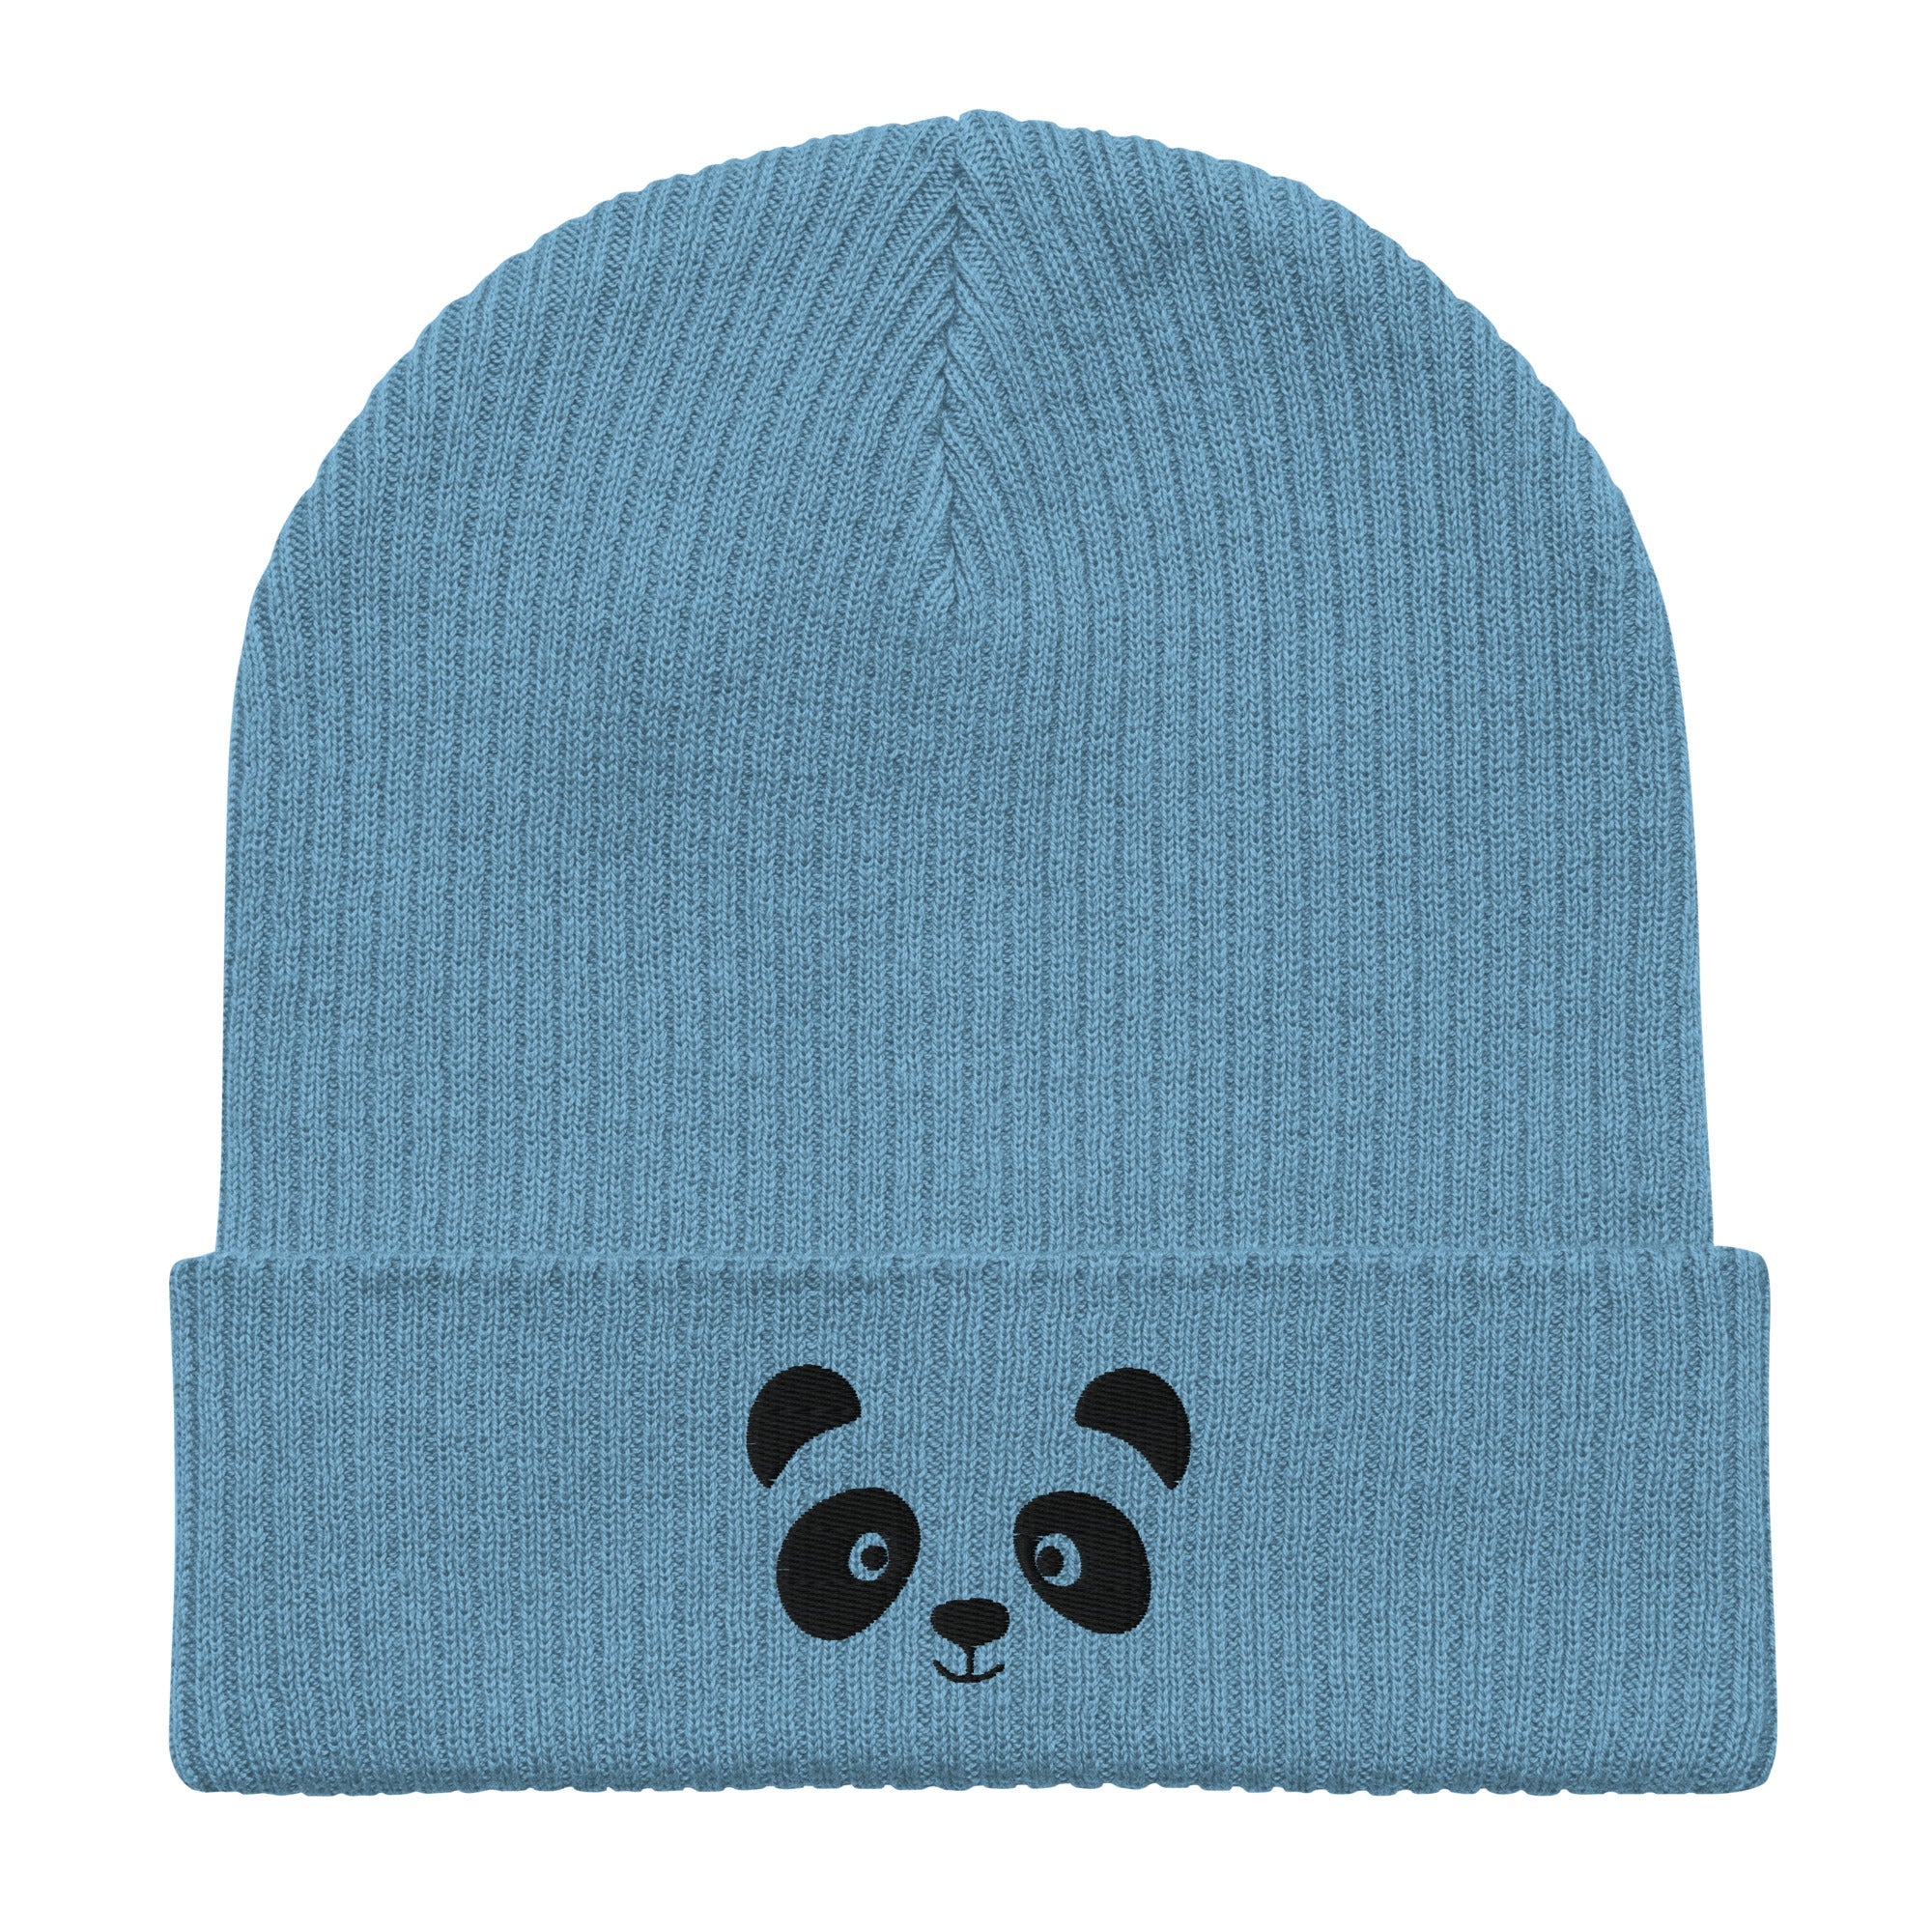 Panda face black embroidered, organic cotton ribbed beanie-12